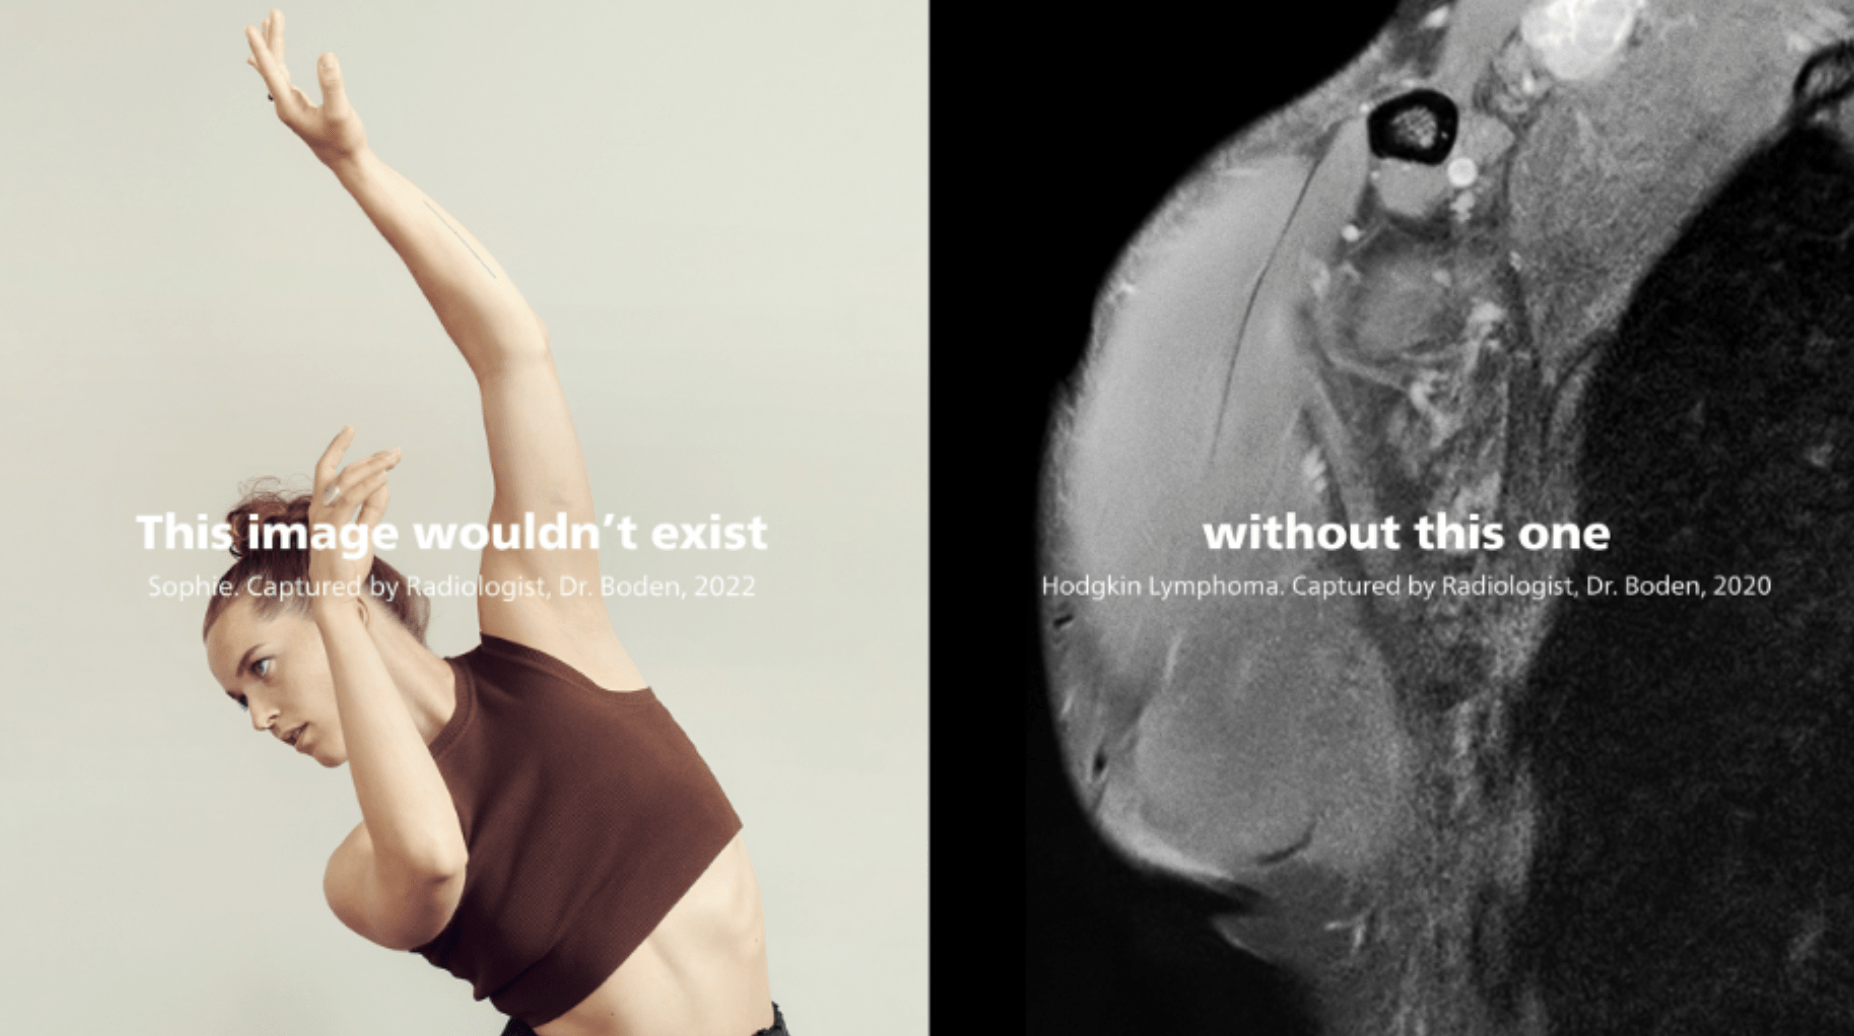 Side by side images. On the right is a portrait photo of a woman bending over to the side. On the left is an x-ray photo of the woman's shoulder.